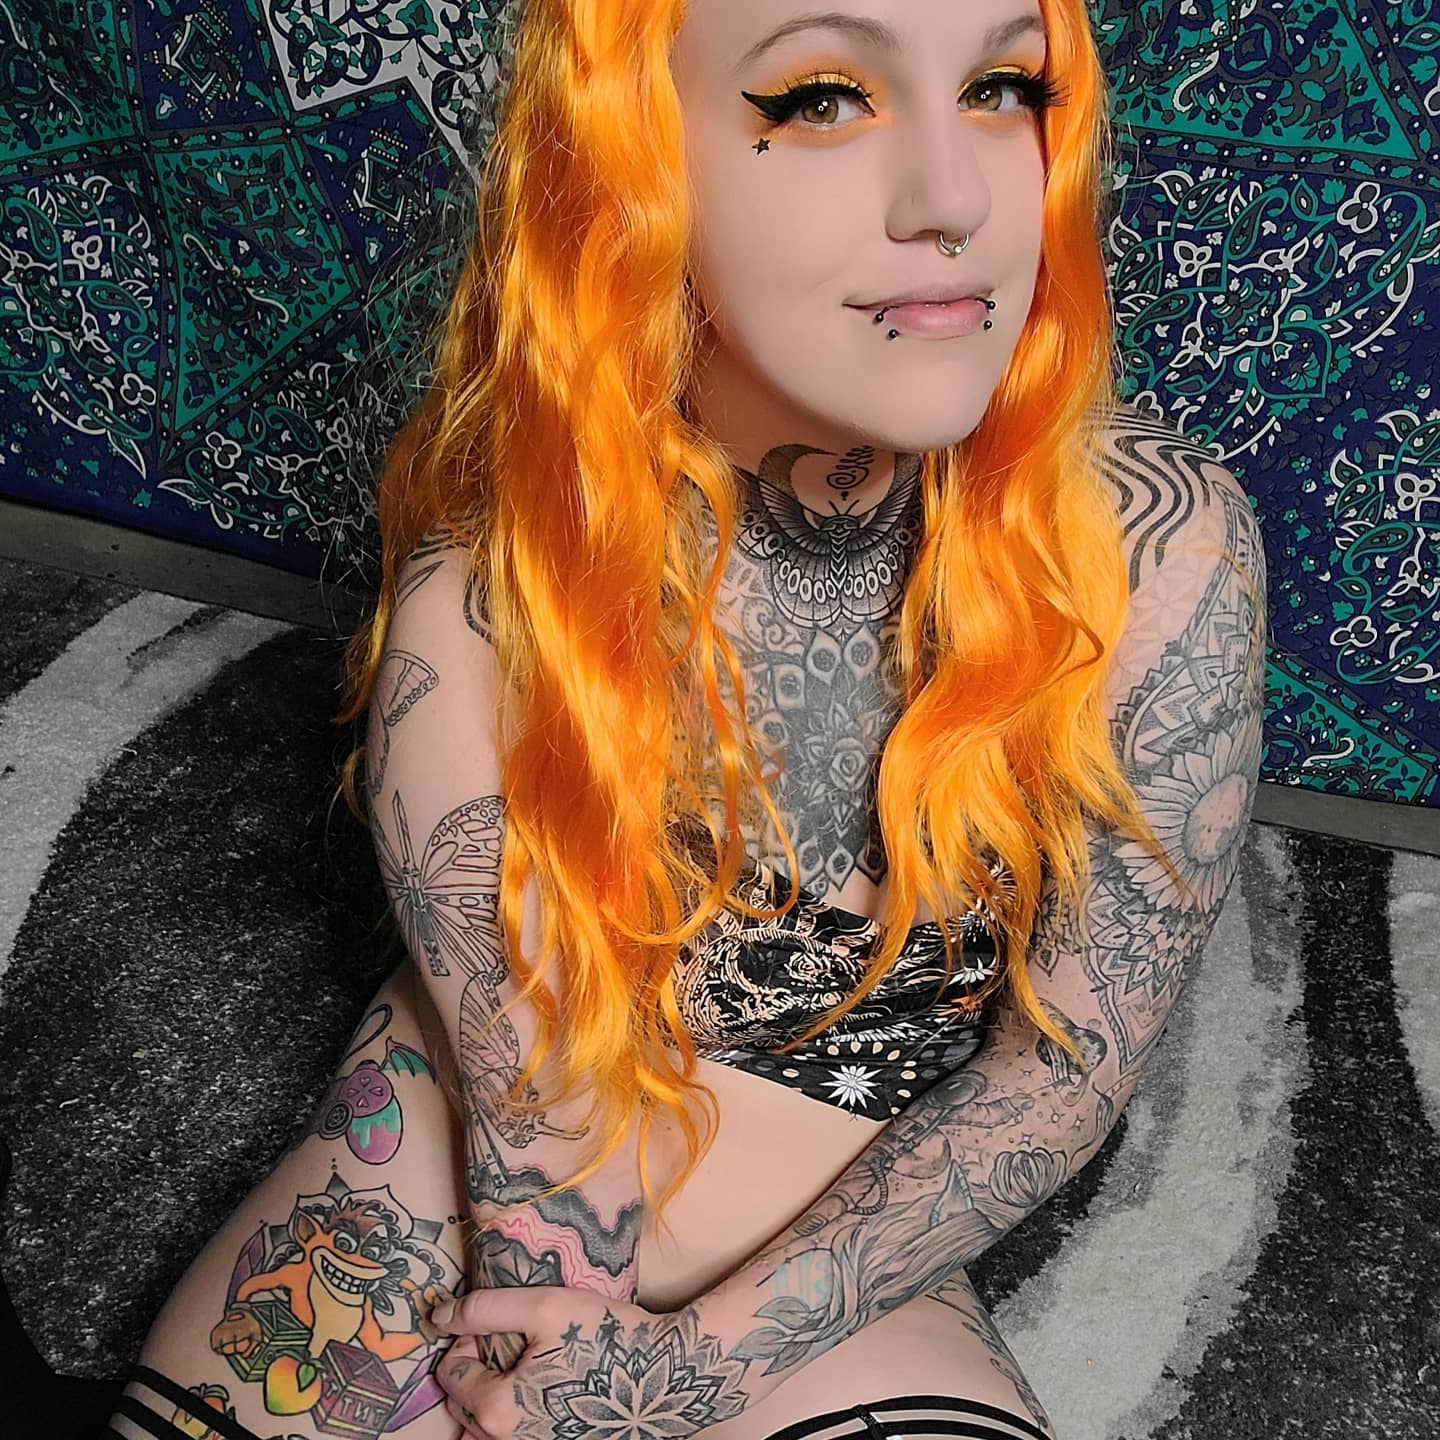 Lil orange Creamsicle. 😘 🔗 is in my bio, and im having a $ale. Come play with meeeee. 
 ☆
☆
☆
#onlyfansbbw #orangehair #model #contentcreator #tattedgirls #tattedup #tattooedbabes #onlyfans #onlyfanz #girls #single #ffff